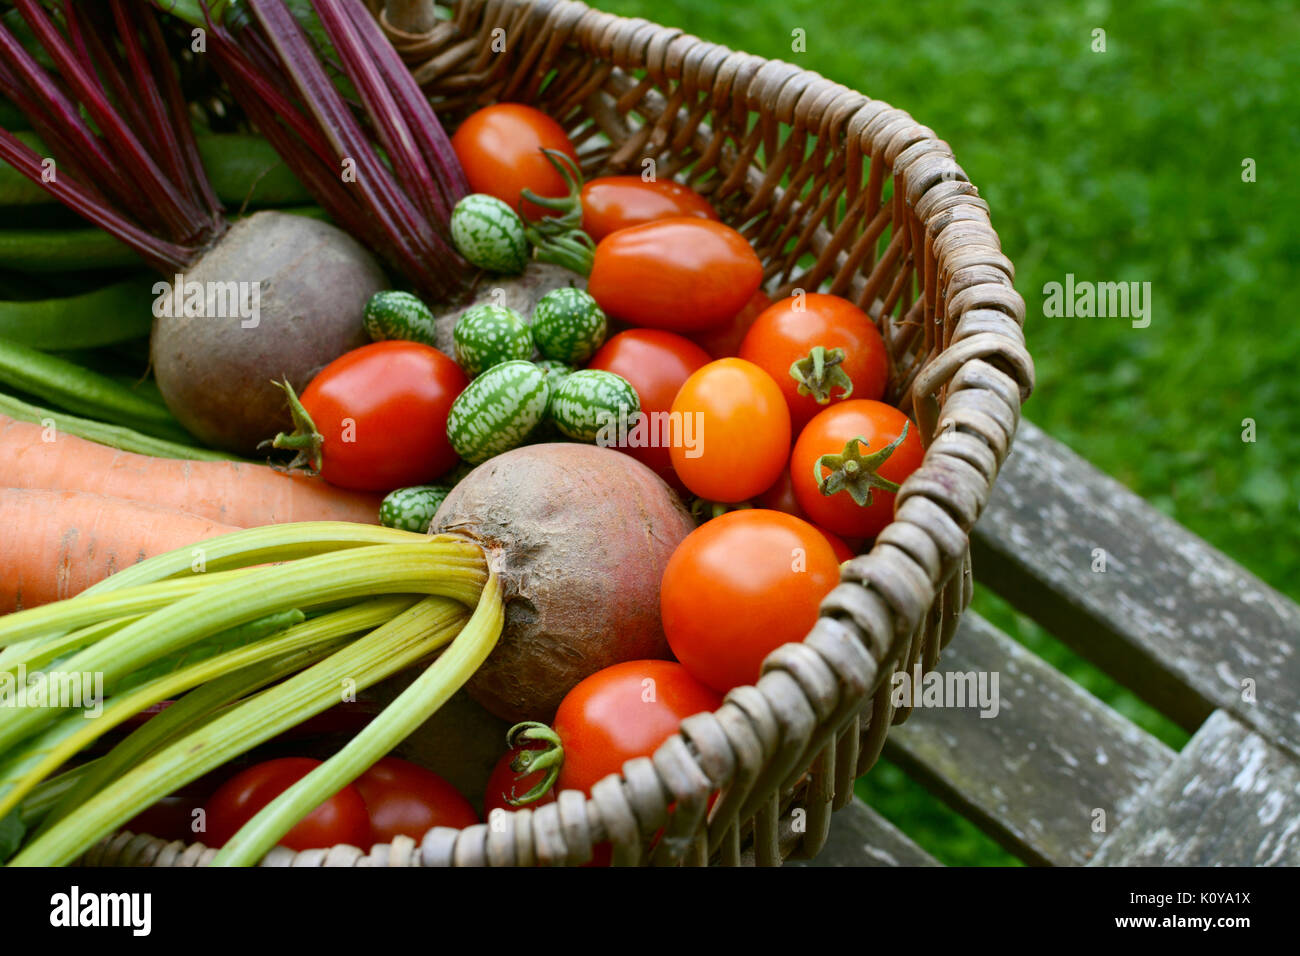 Close-up of beetroot and tomatoes with cucamelons and carrots in a wicker basket on a rustic garden bench Stock Photo